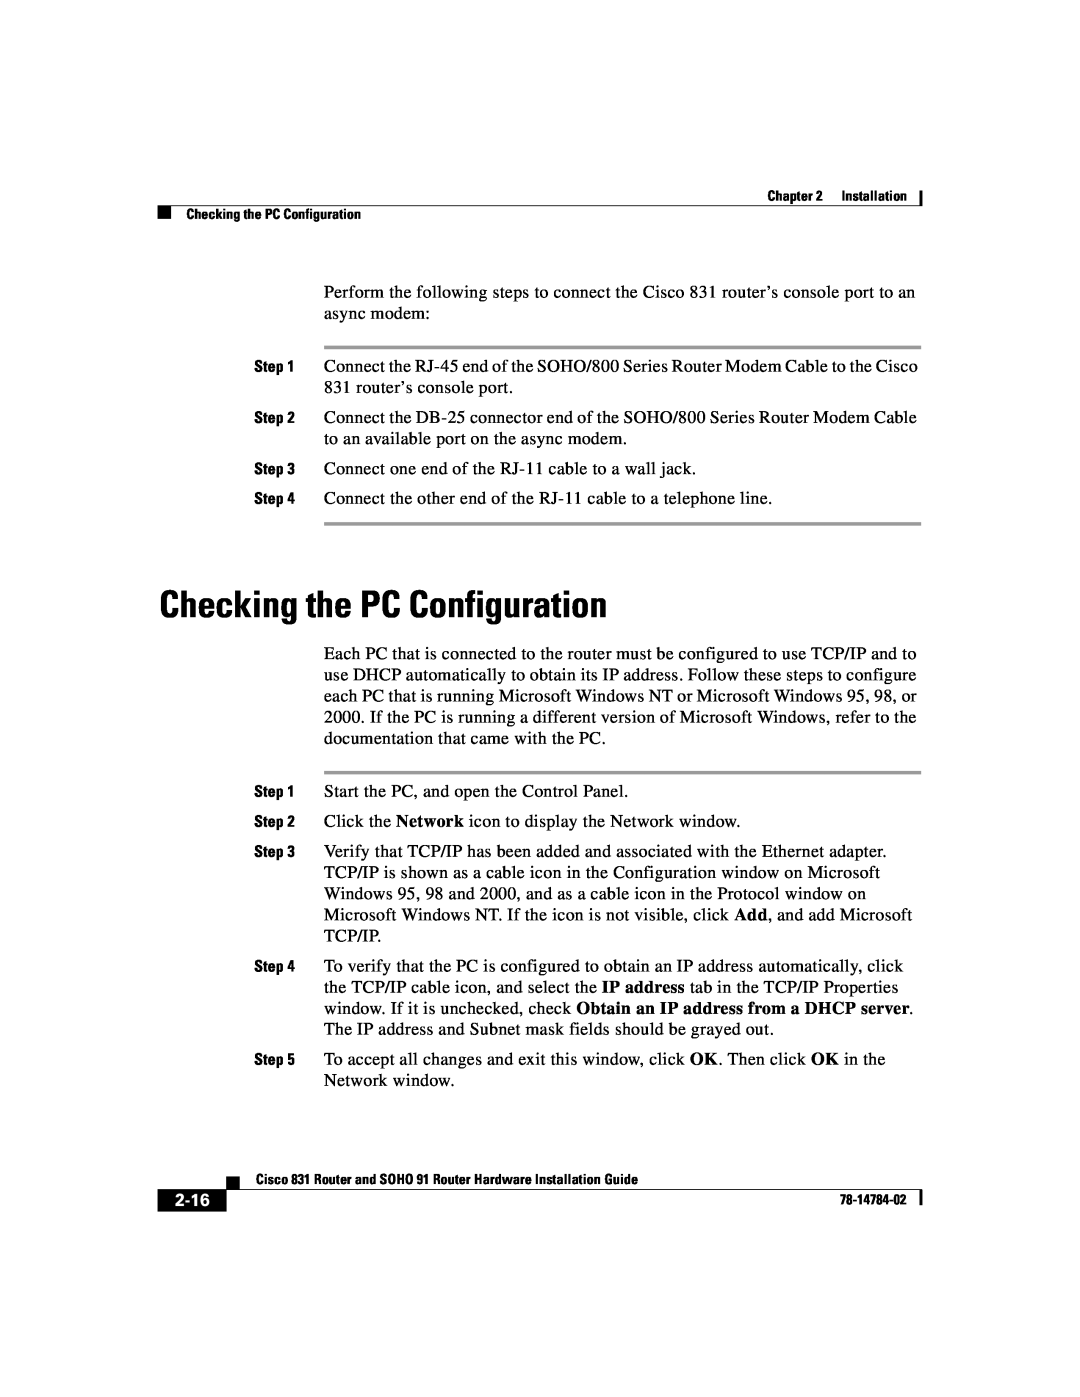 Cisco Systems 78-14784-02 manual Checking the PC Configuration, 2-16 